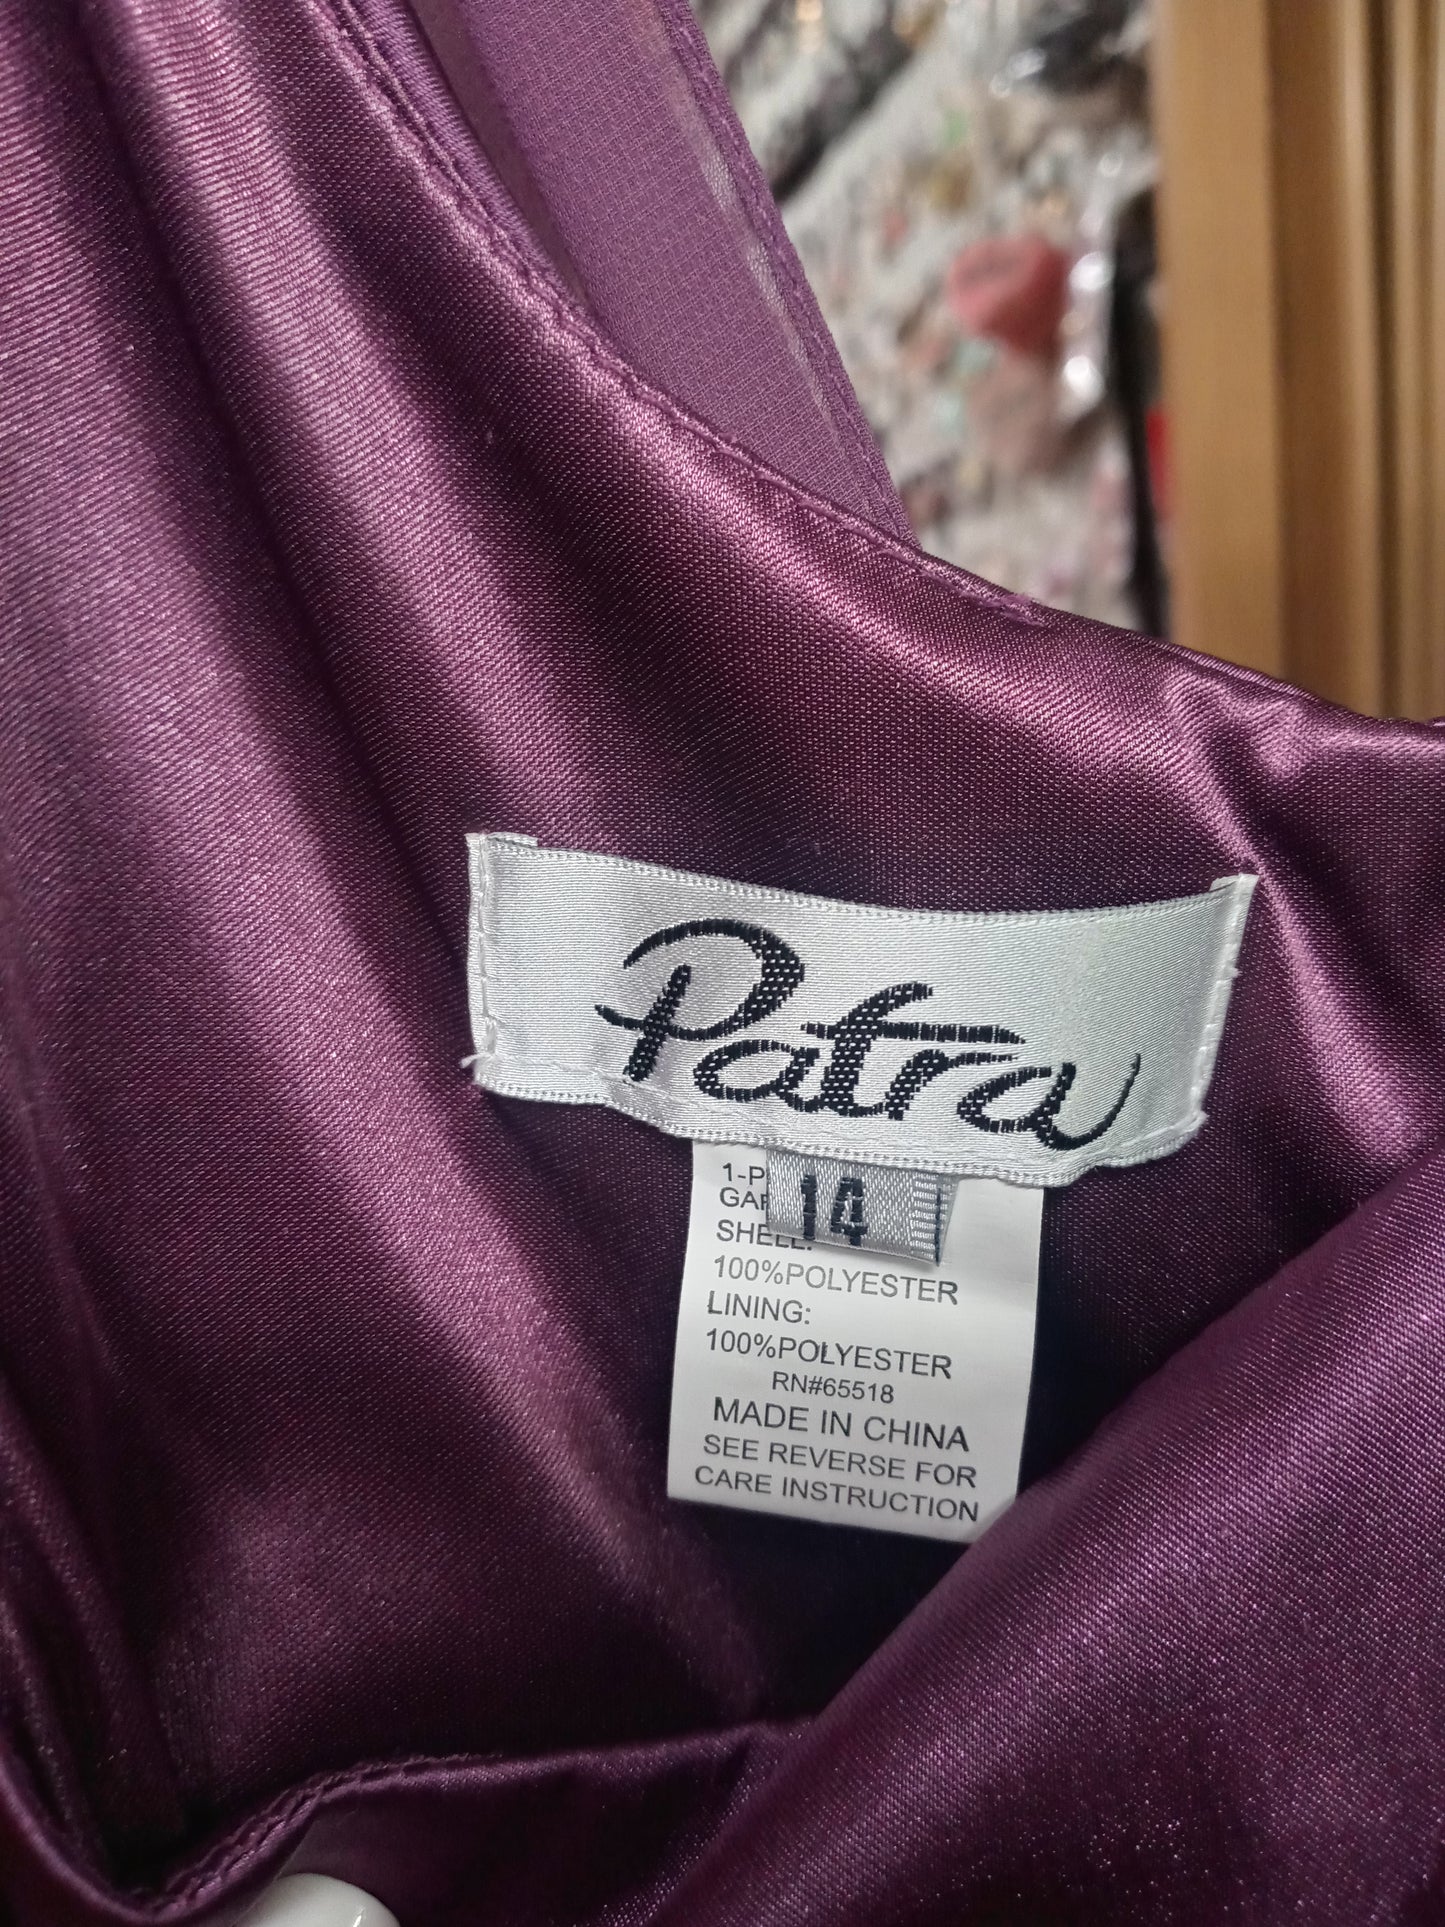 Woman Evening Gown By:Patra Brand Size 14 Color Purple